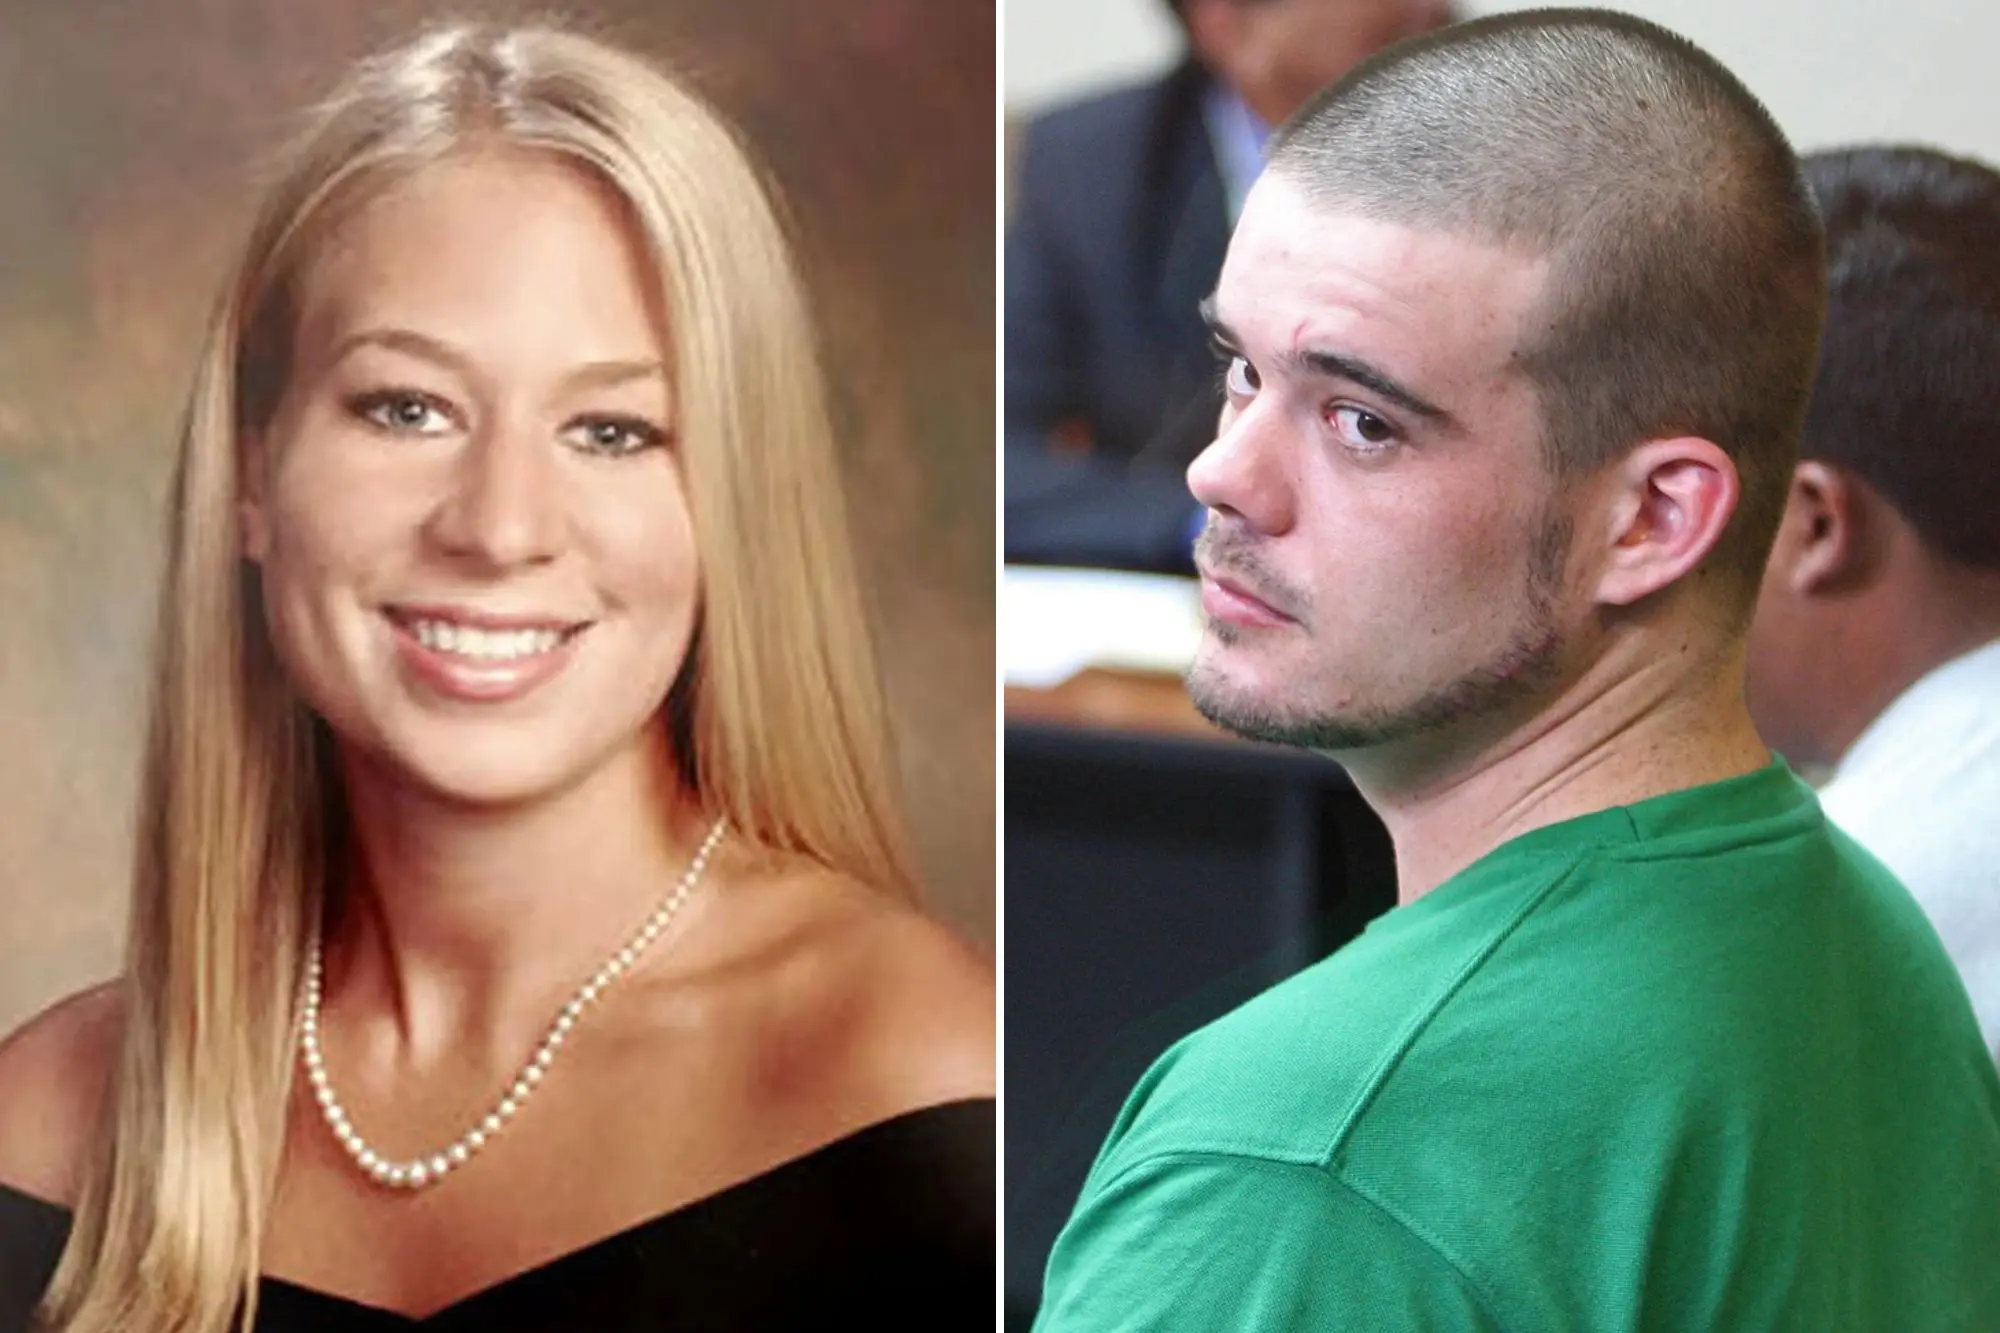 Suspect in Natalee Holloway Disappearance to Reveal Details of Her Death in Plea Deal, Lawyer Says